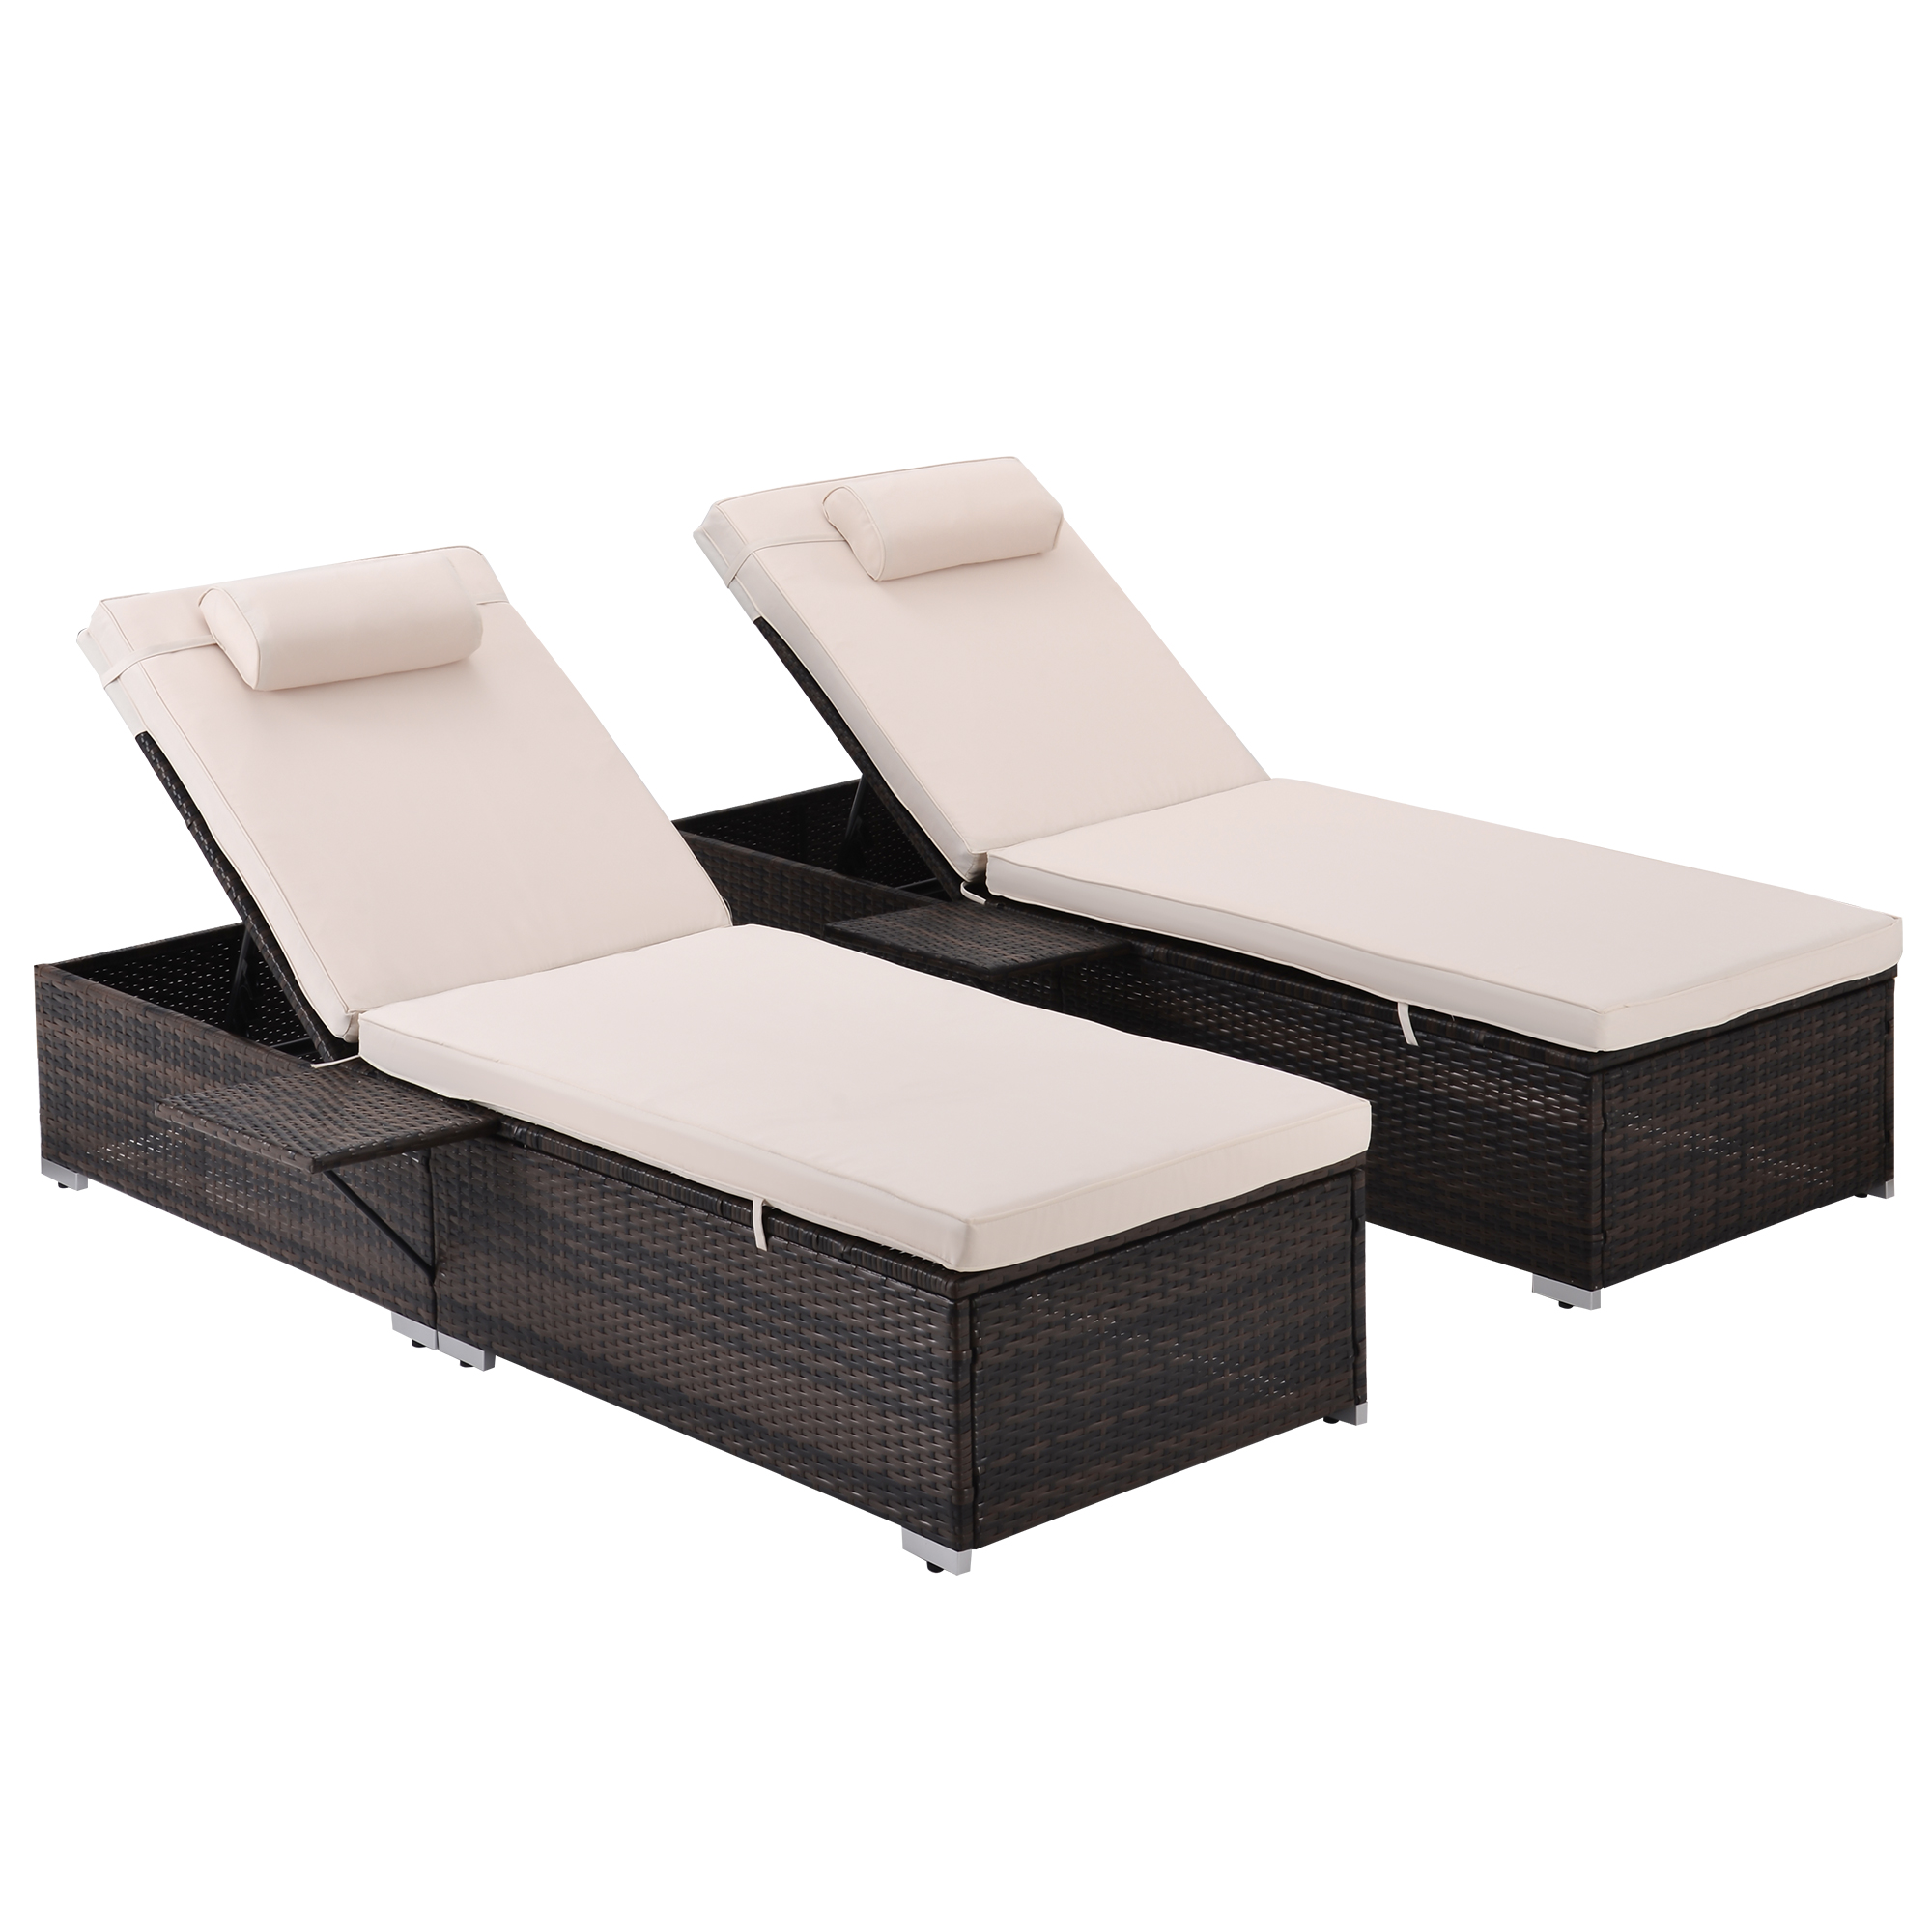 2 Piece Outdoor Patio Lounge Chairs, Adjustable Wicker Recliner PE Rattan Reclining Chair Set with Cushion, Side Table & Head Pillow, Outdoor Chaise Lounge for Garden Balcony Pool Deck Backyard, J2468 - image 1 of 15